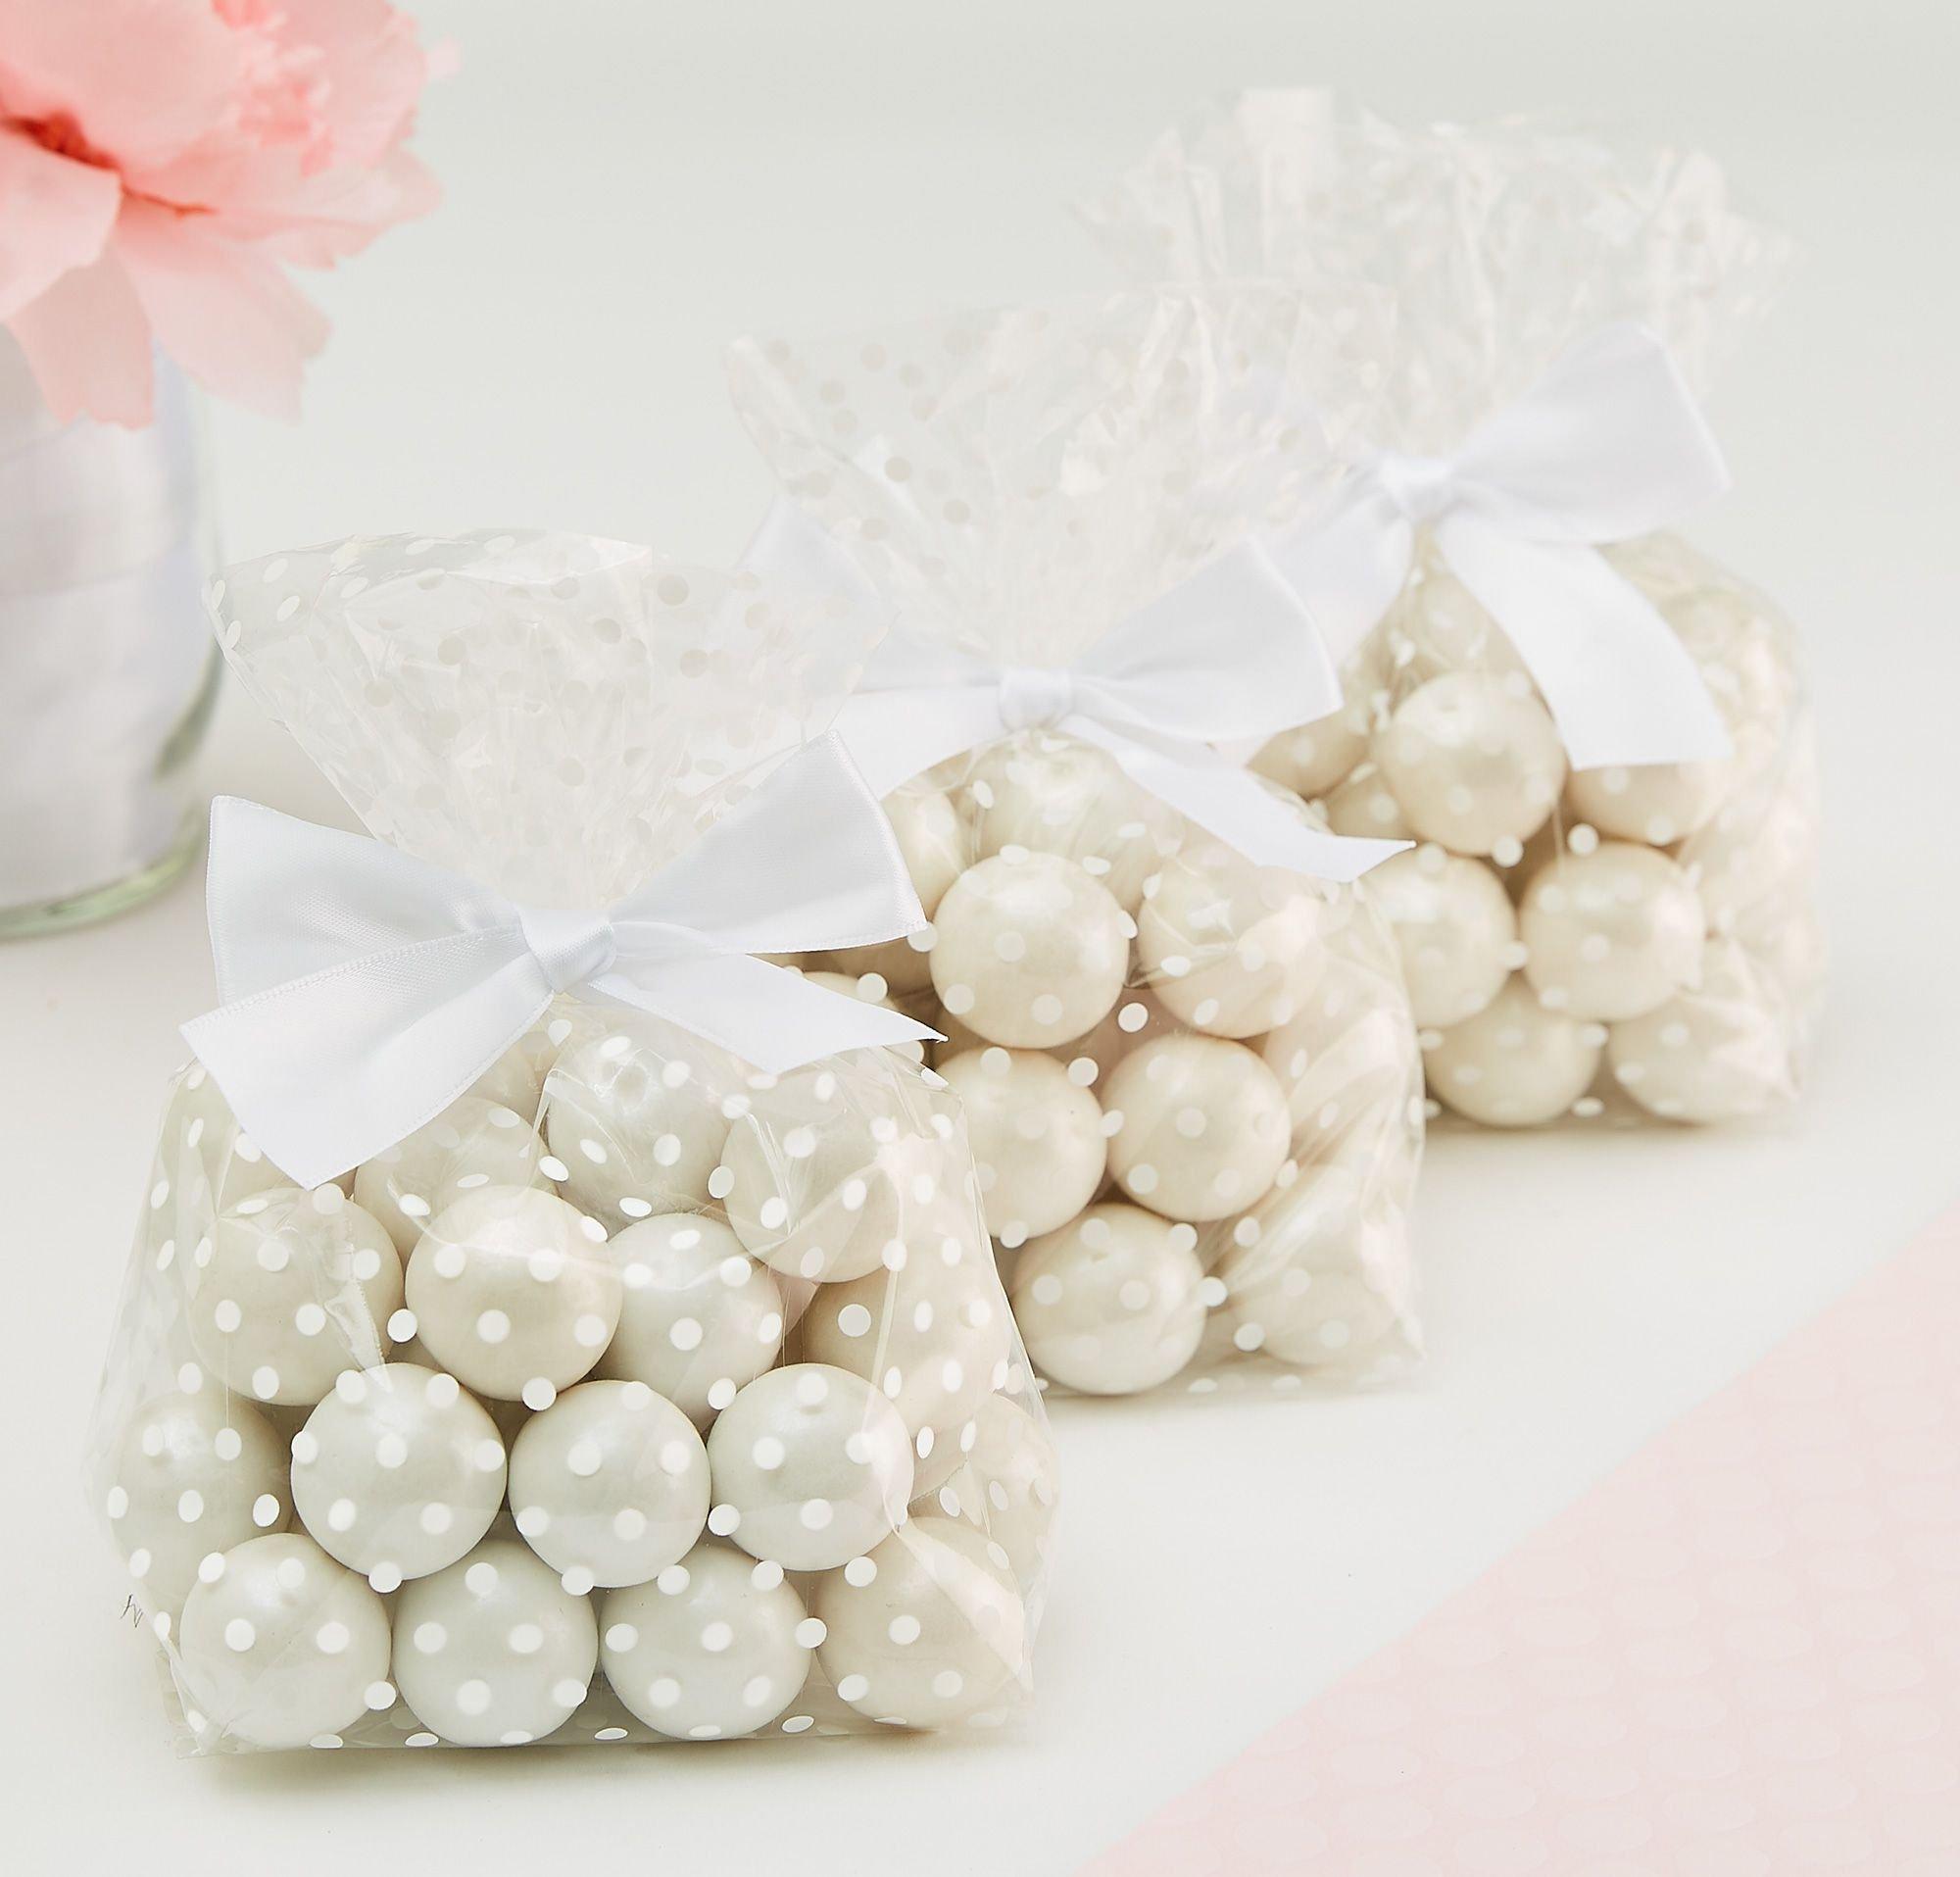 Polka Dot Treat Bags with Bows 12ct